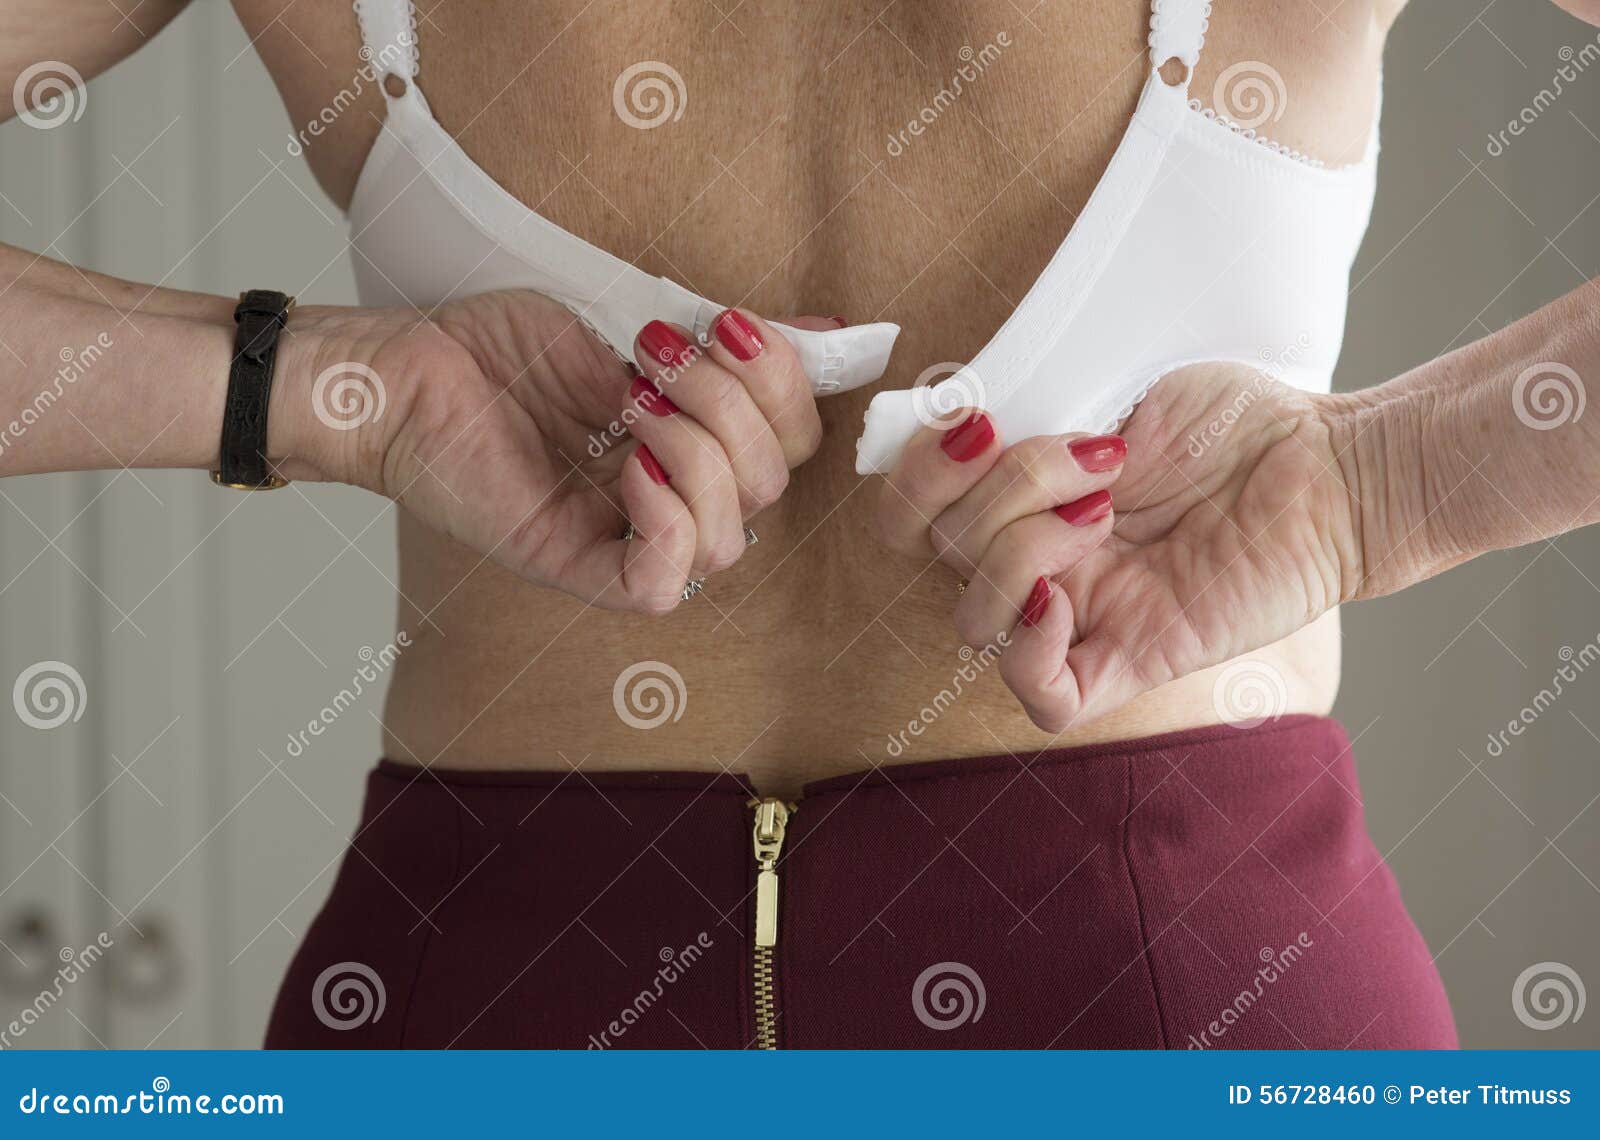 Fastening a woman s bra stock photo. Image of dressing - 56728460